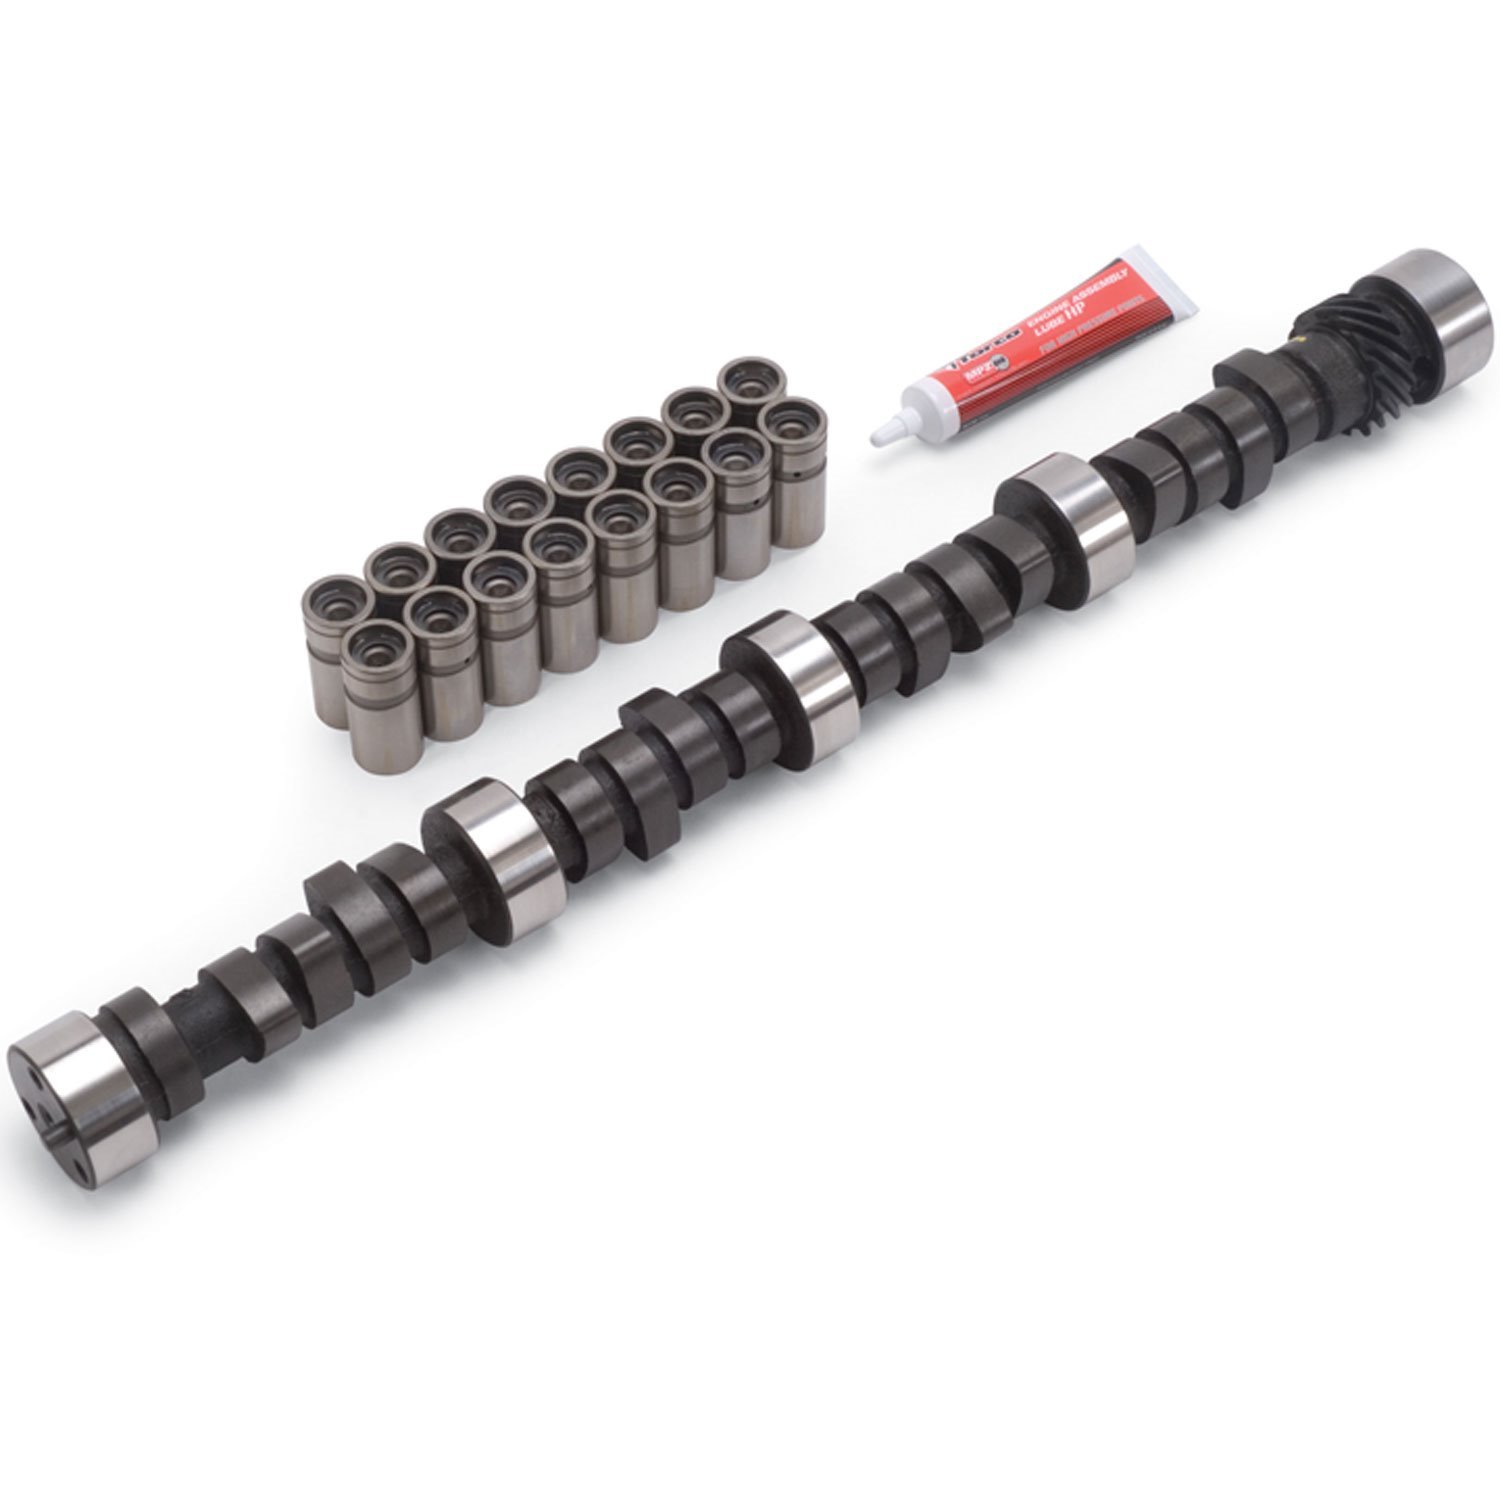 Performer RPM Camshaft Kit for Small Block Chevy